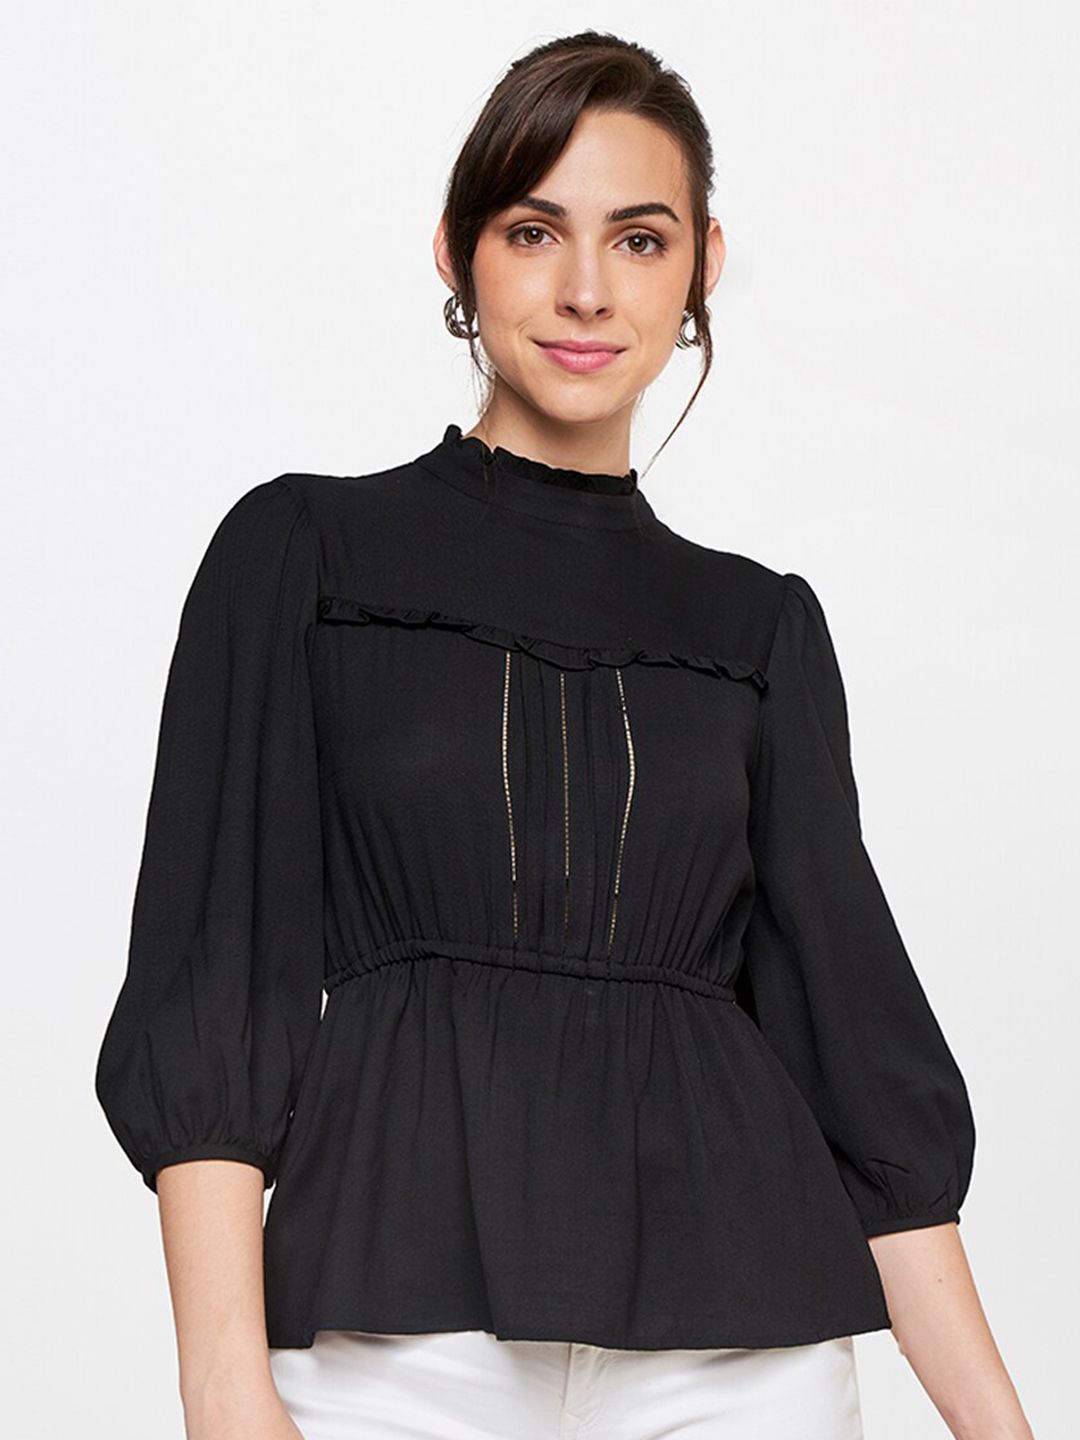 AND Black Cinched Waist Top Price in India